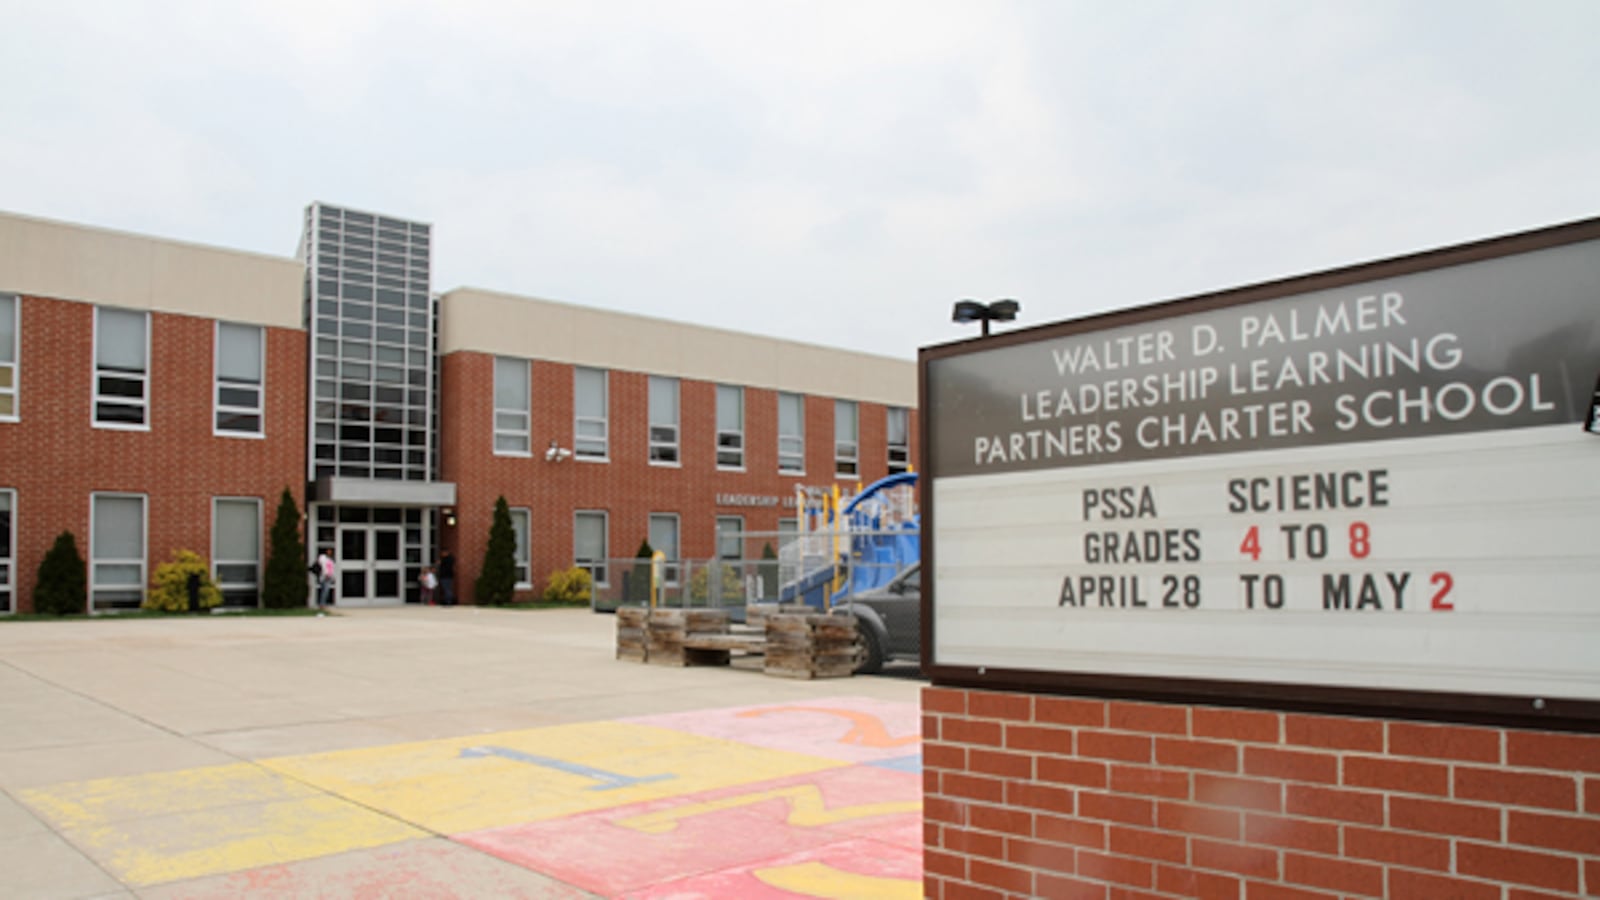 Exterior of Walter D. Palmer Leadership Learning Partners Charter School.